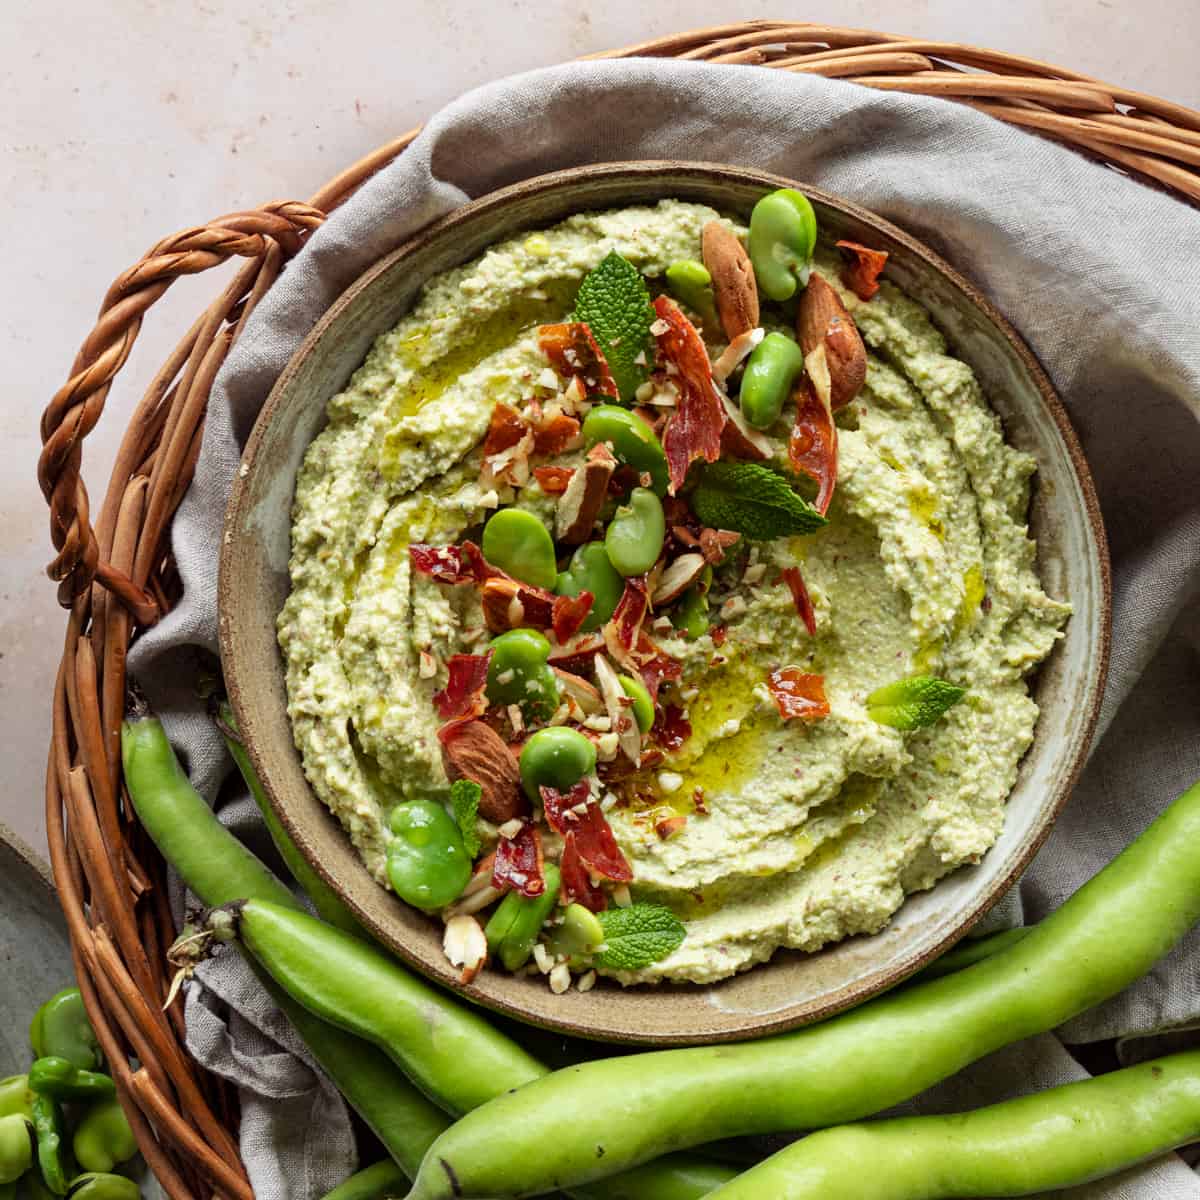 Broad beans pesto in a bowl placed in a wooden basket